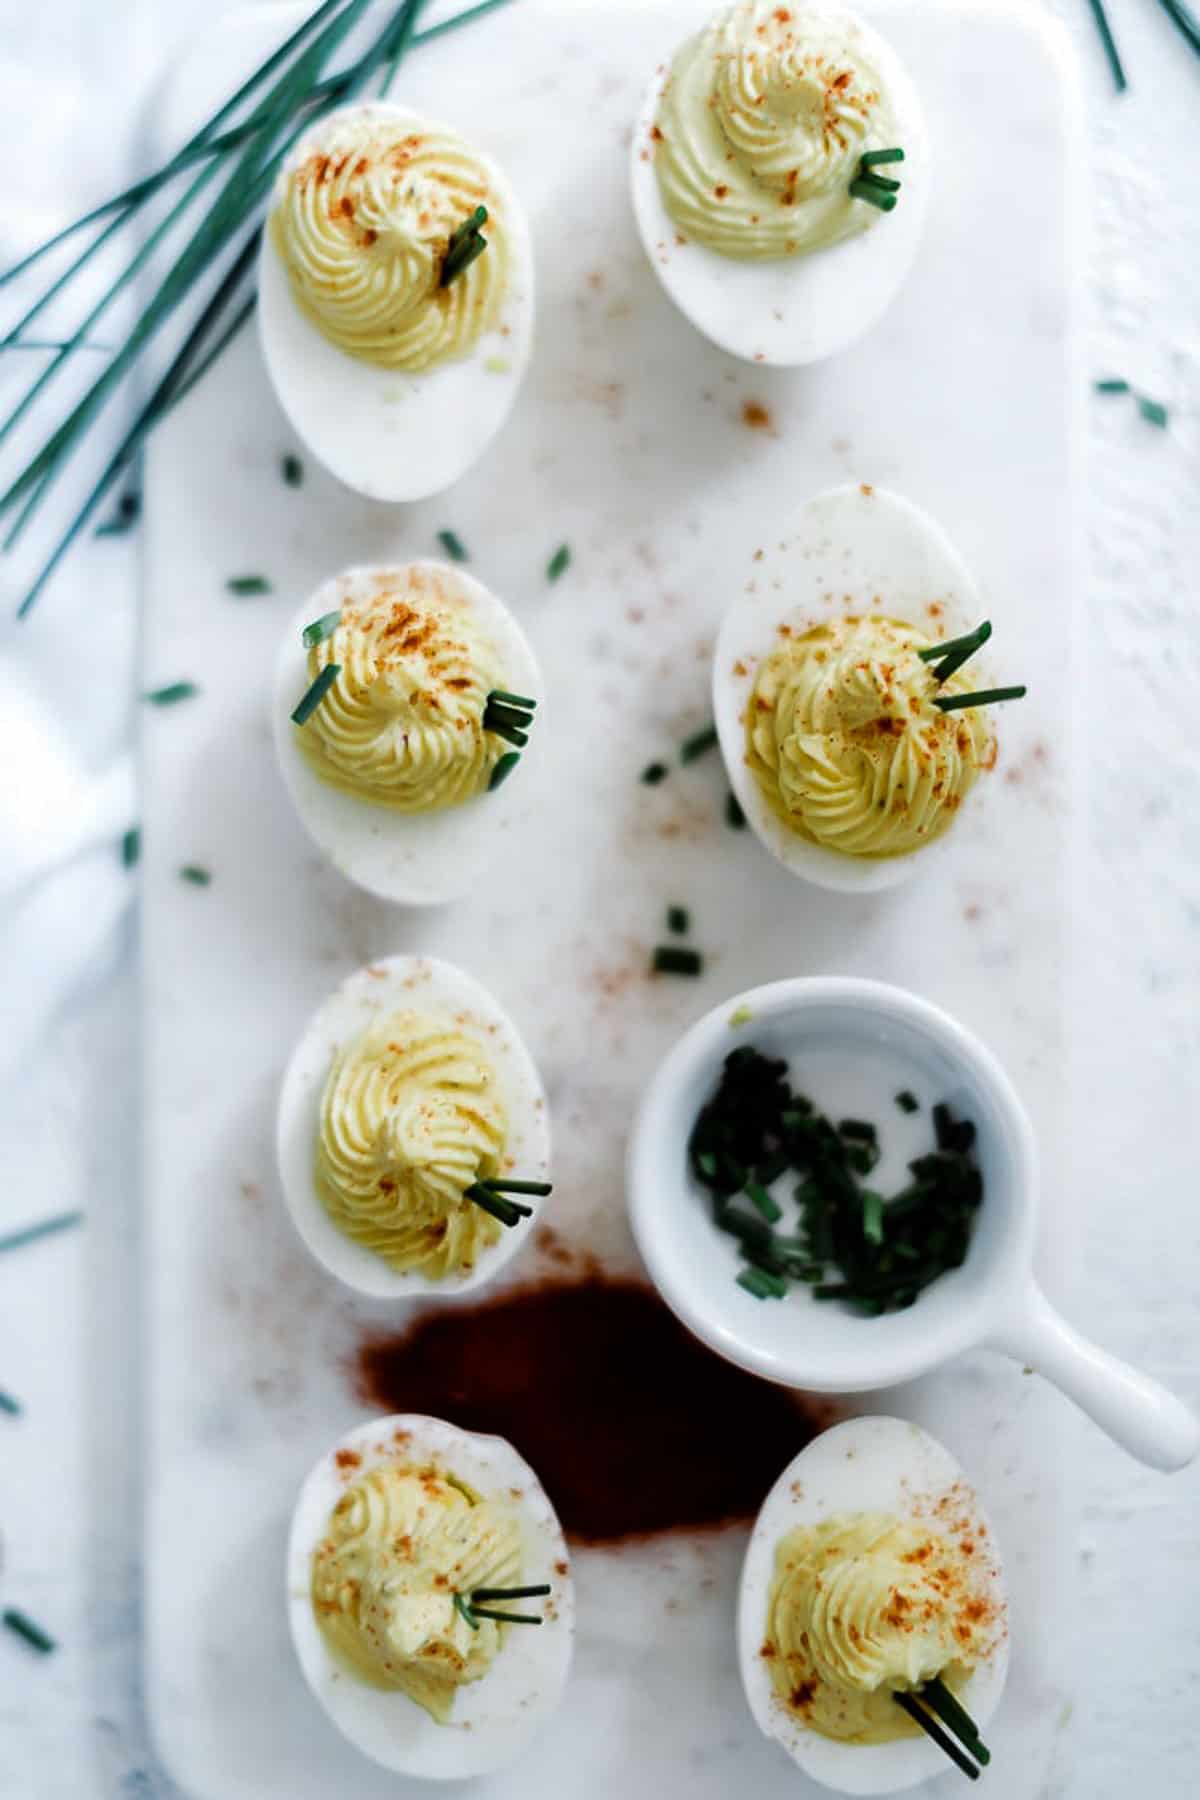 5 star deviled egg recipe on a marble tray. There is a small bowl of chives to the side.